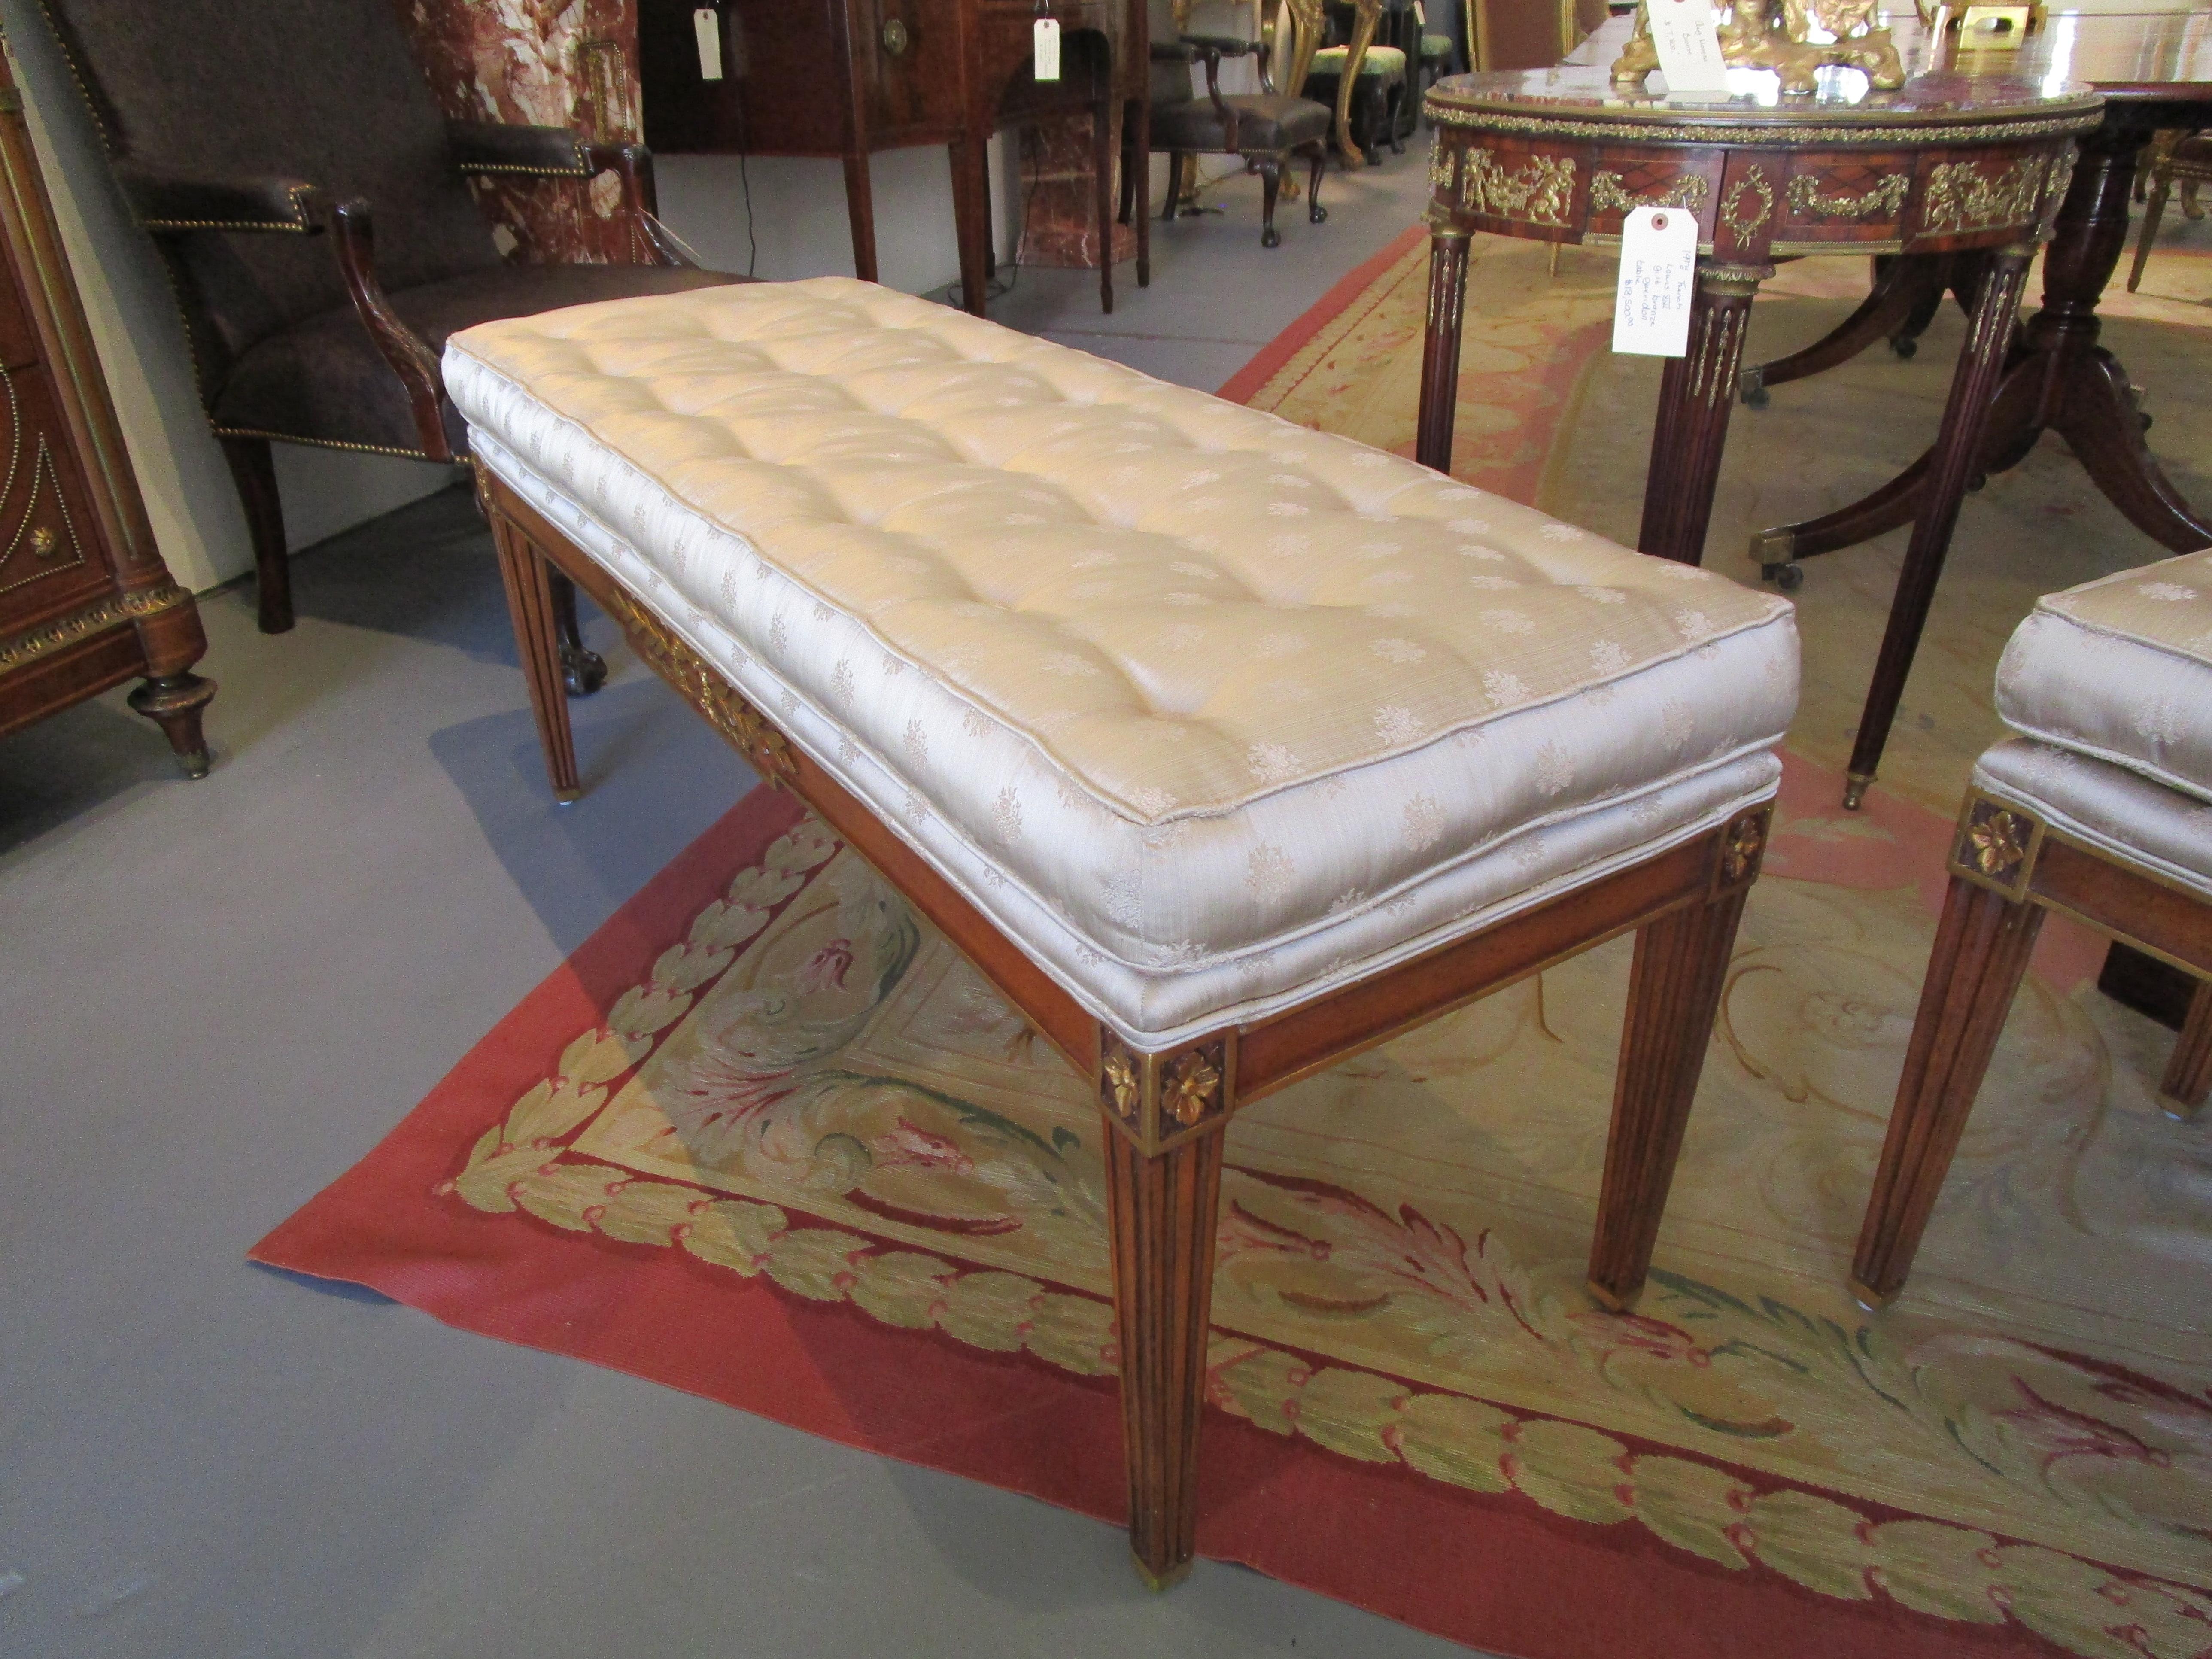 A fine late 19th century to early 20th century Empire mahogany and parcel gilt pair of benches. Tufted upholstery.